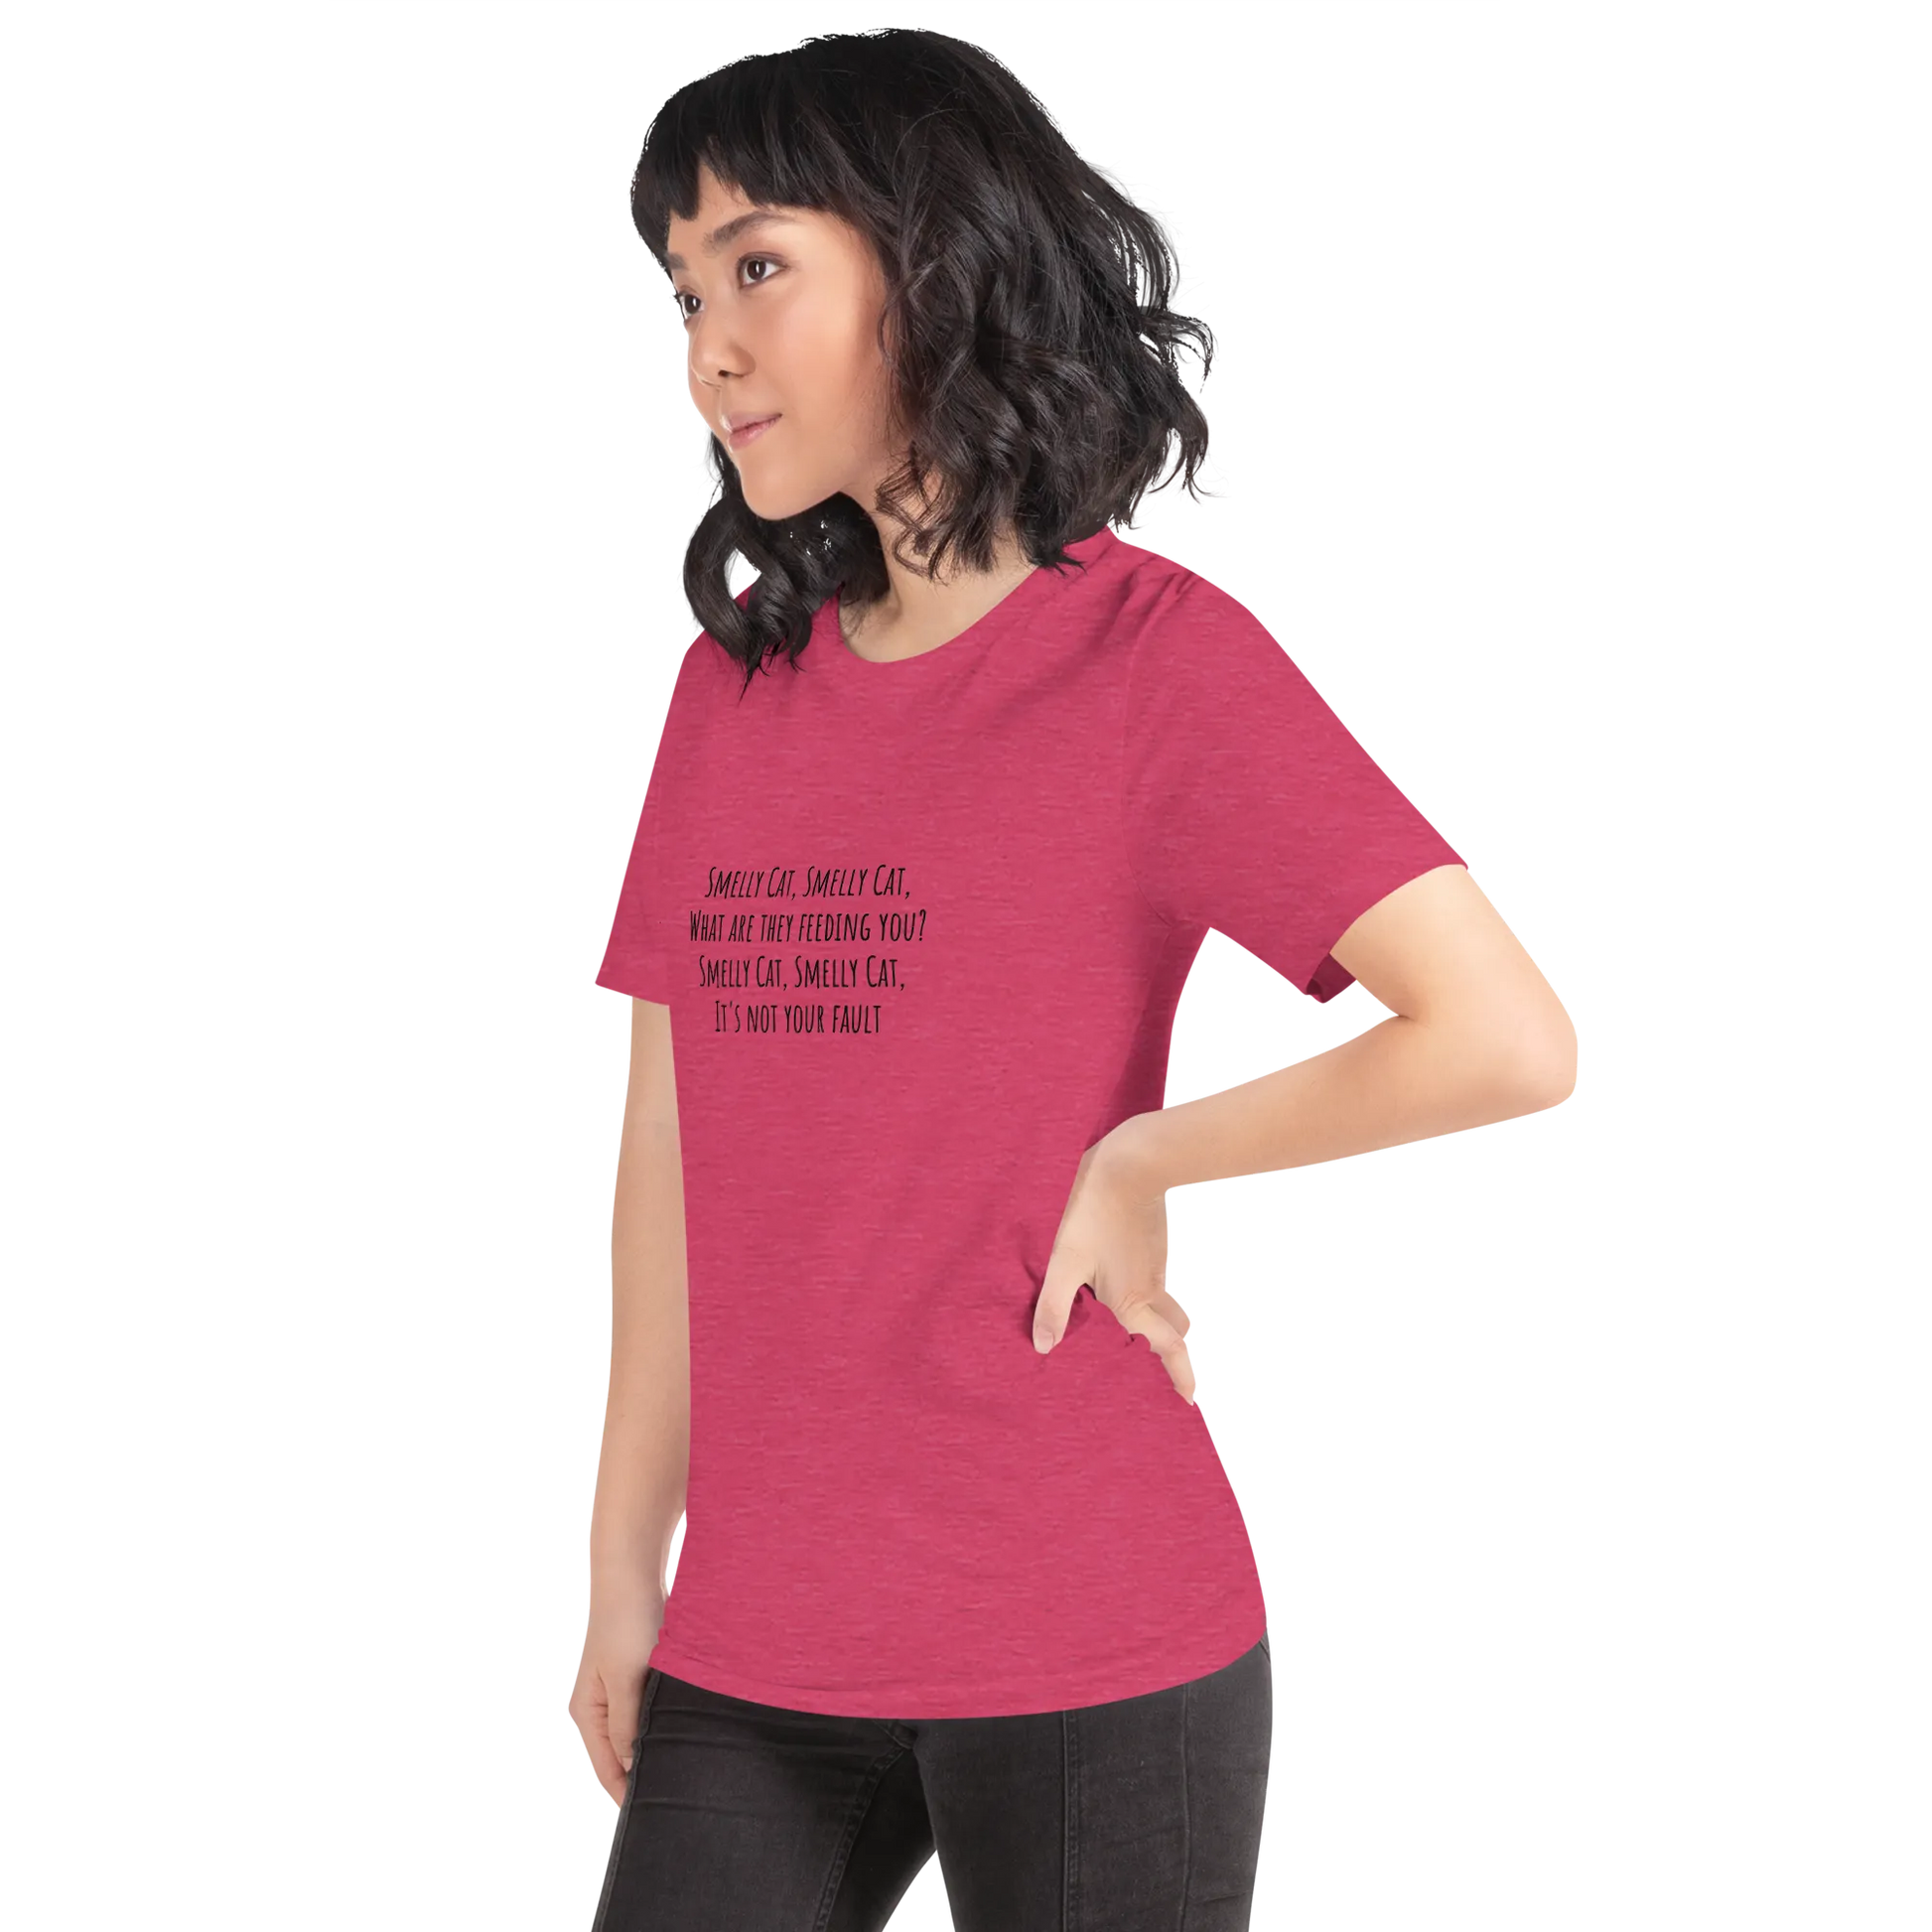 Smelly Cat Tee in Heather Raspberry on woman left